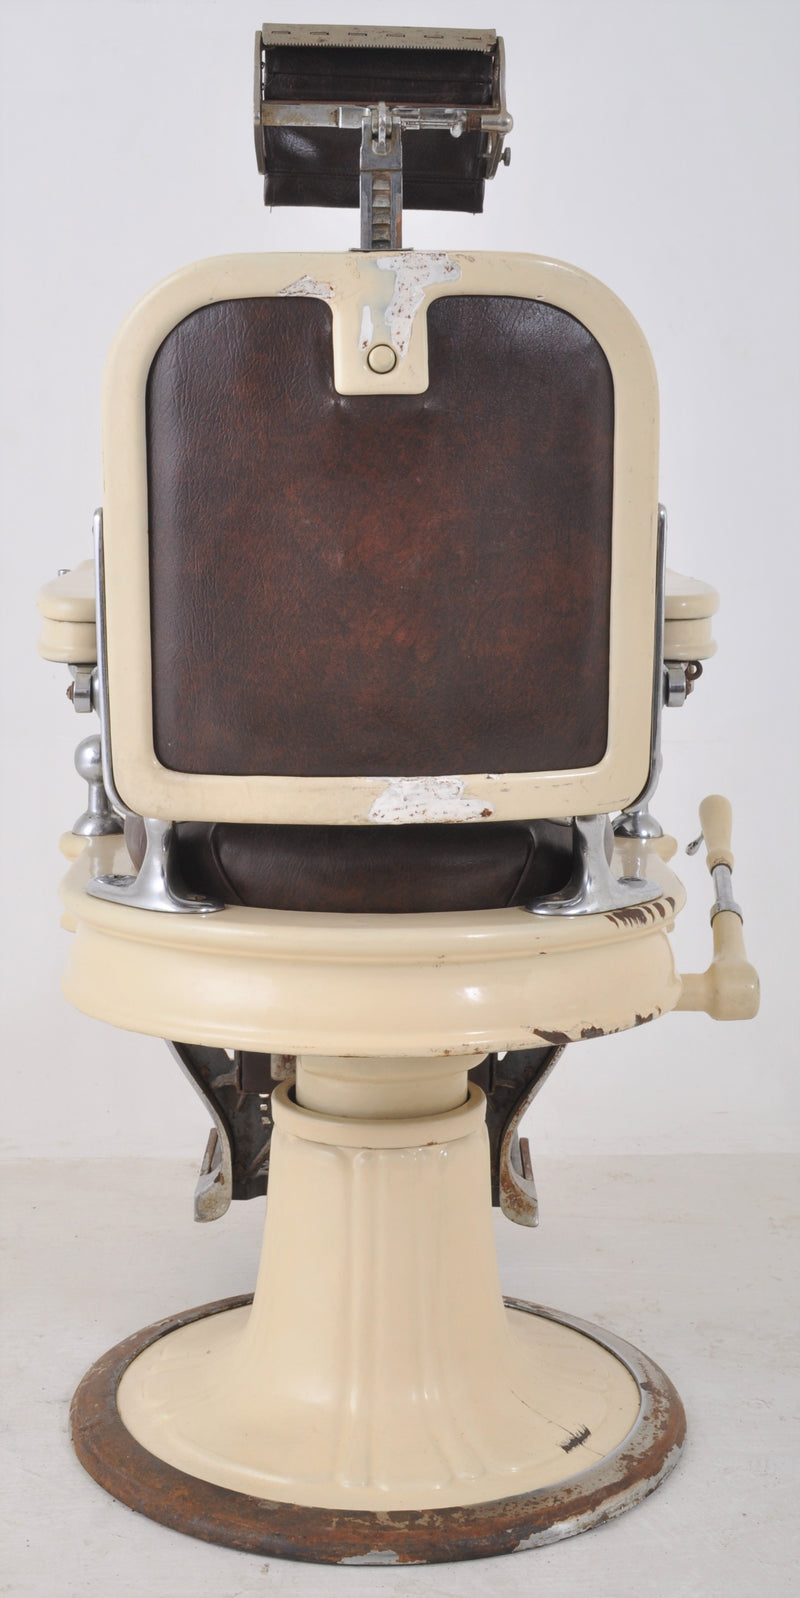 Antique/Vintage Barber Chair by Theo A. Kochs & Co, Chicago, Circa 1930